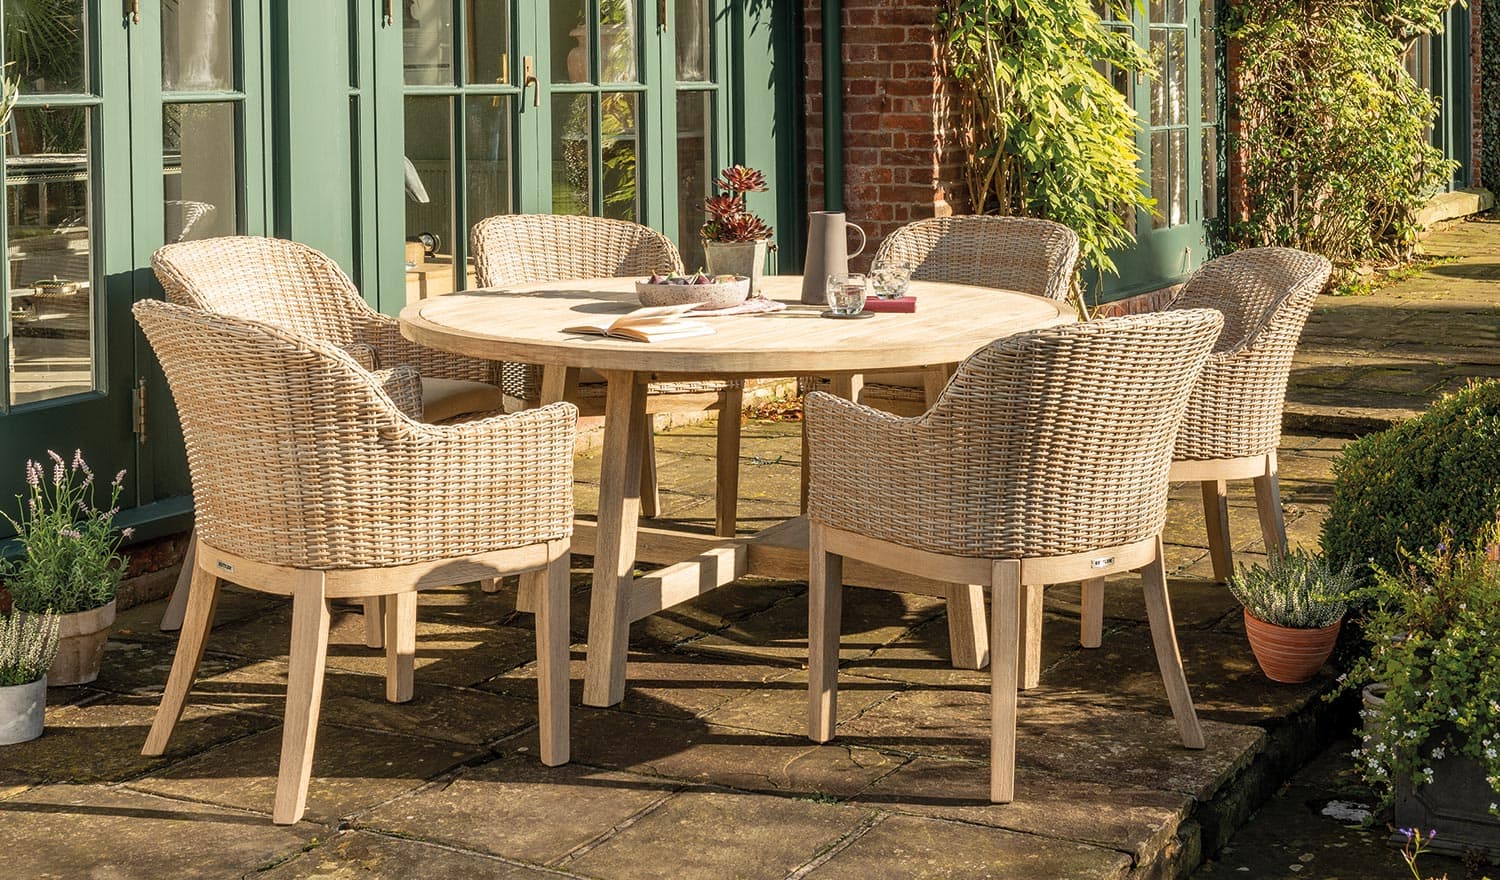 Cora 150cm Round Dining Table 6 Seater, Round Wood Outdoor Table And Chairs